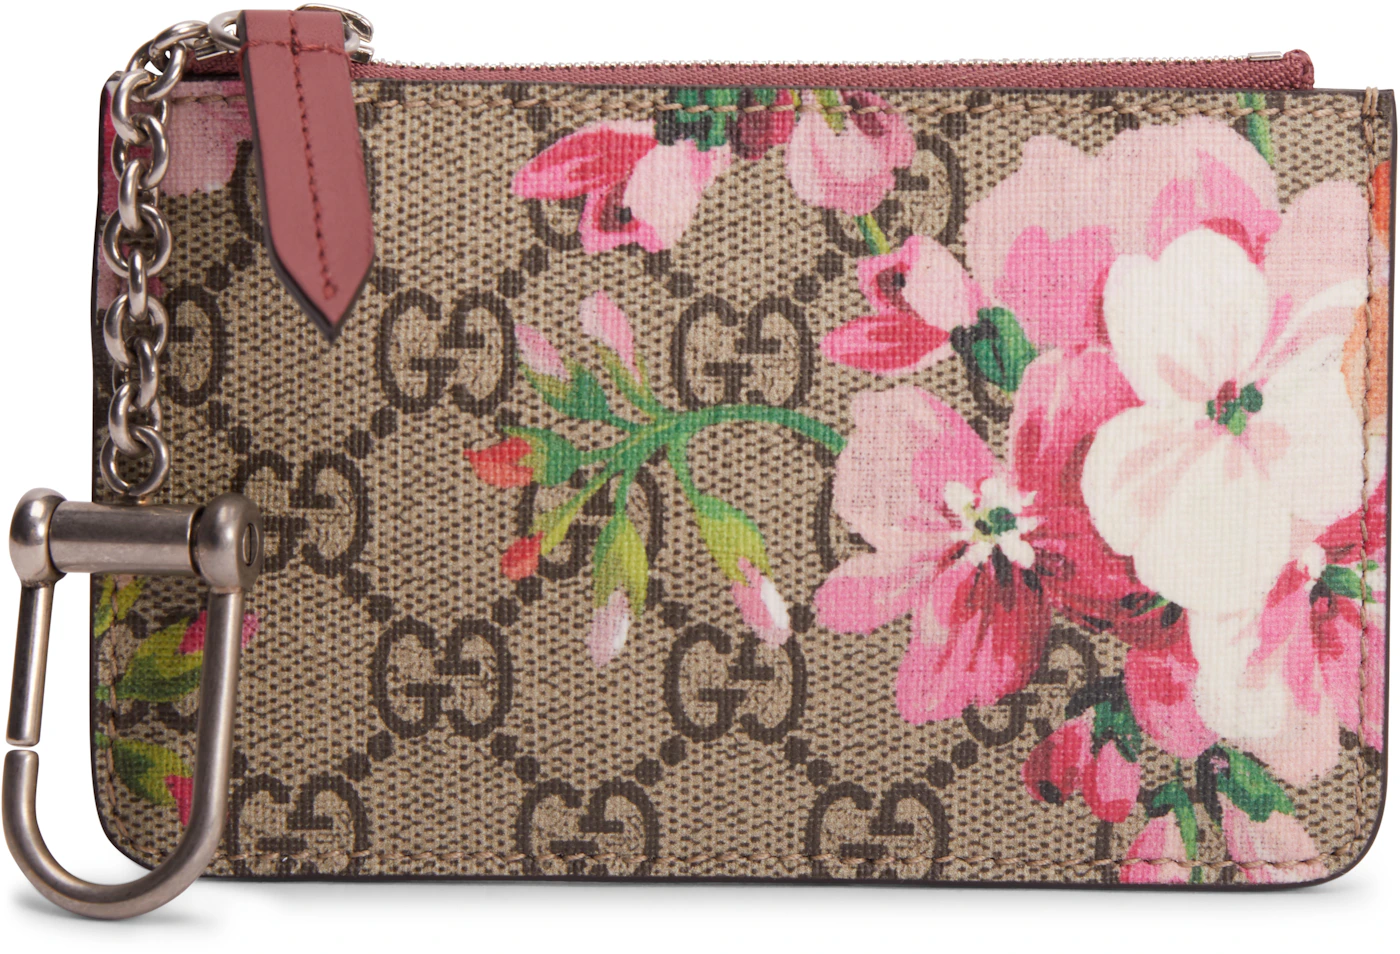 GUCCI Bloom Beauty Fabric Bag Ribbon Pouch NEW